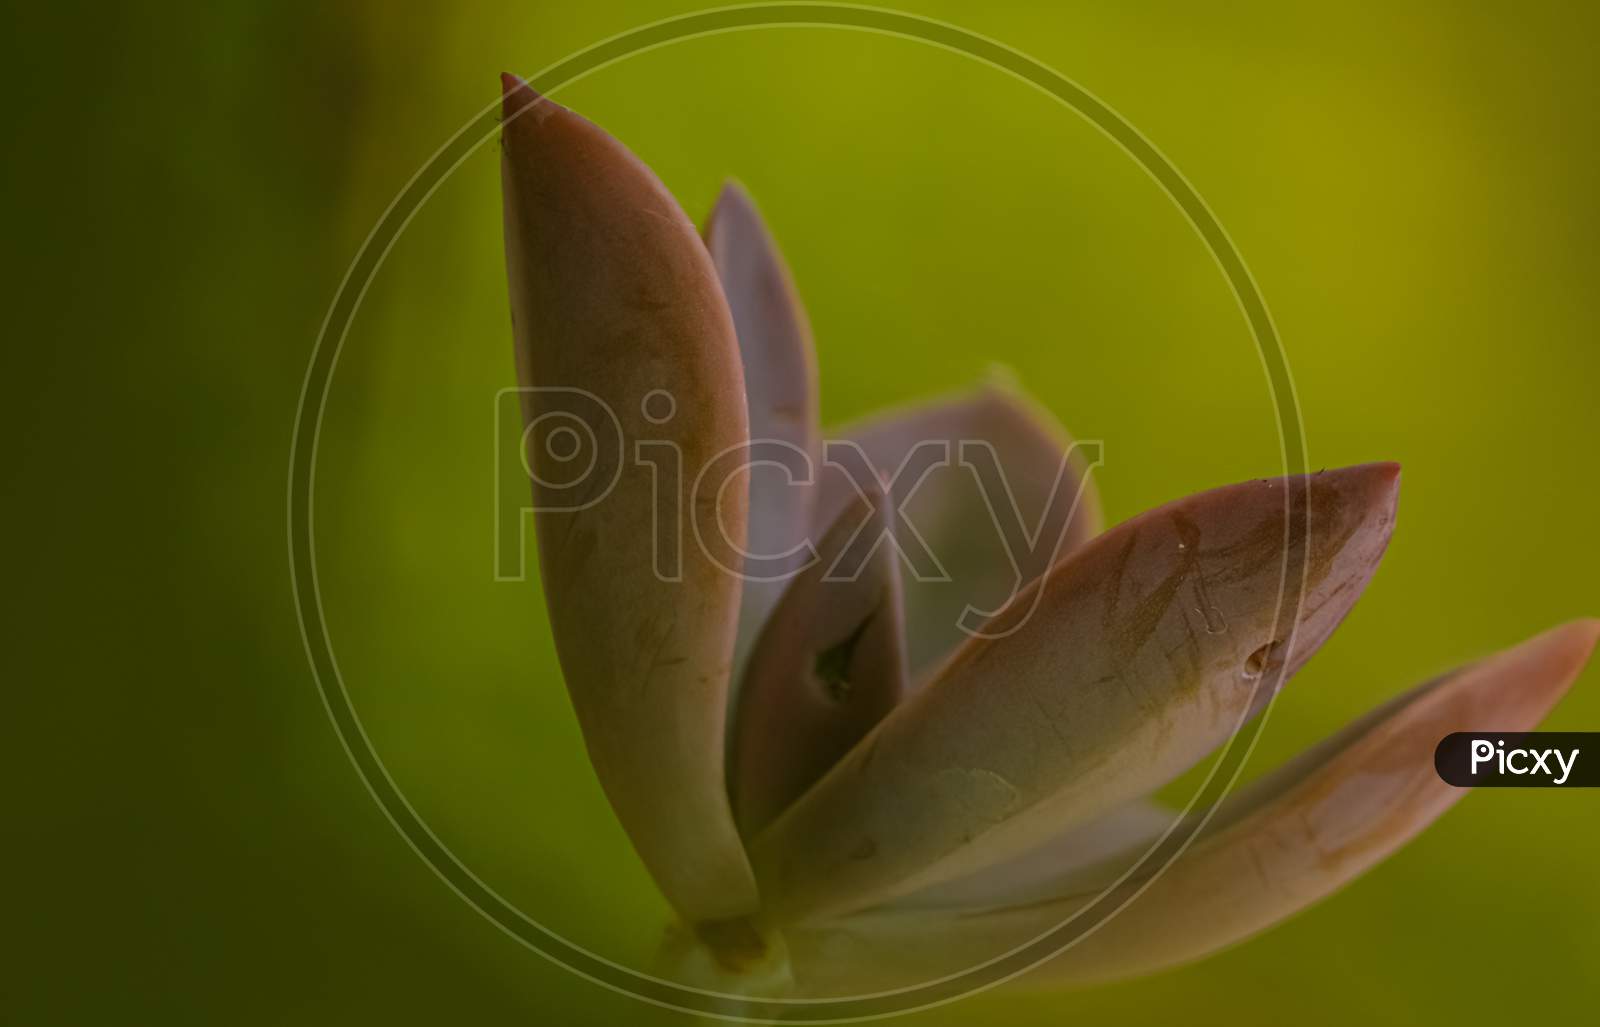 Closeup of a bright lovely echeveria plant with green background